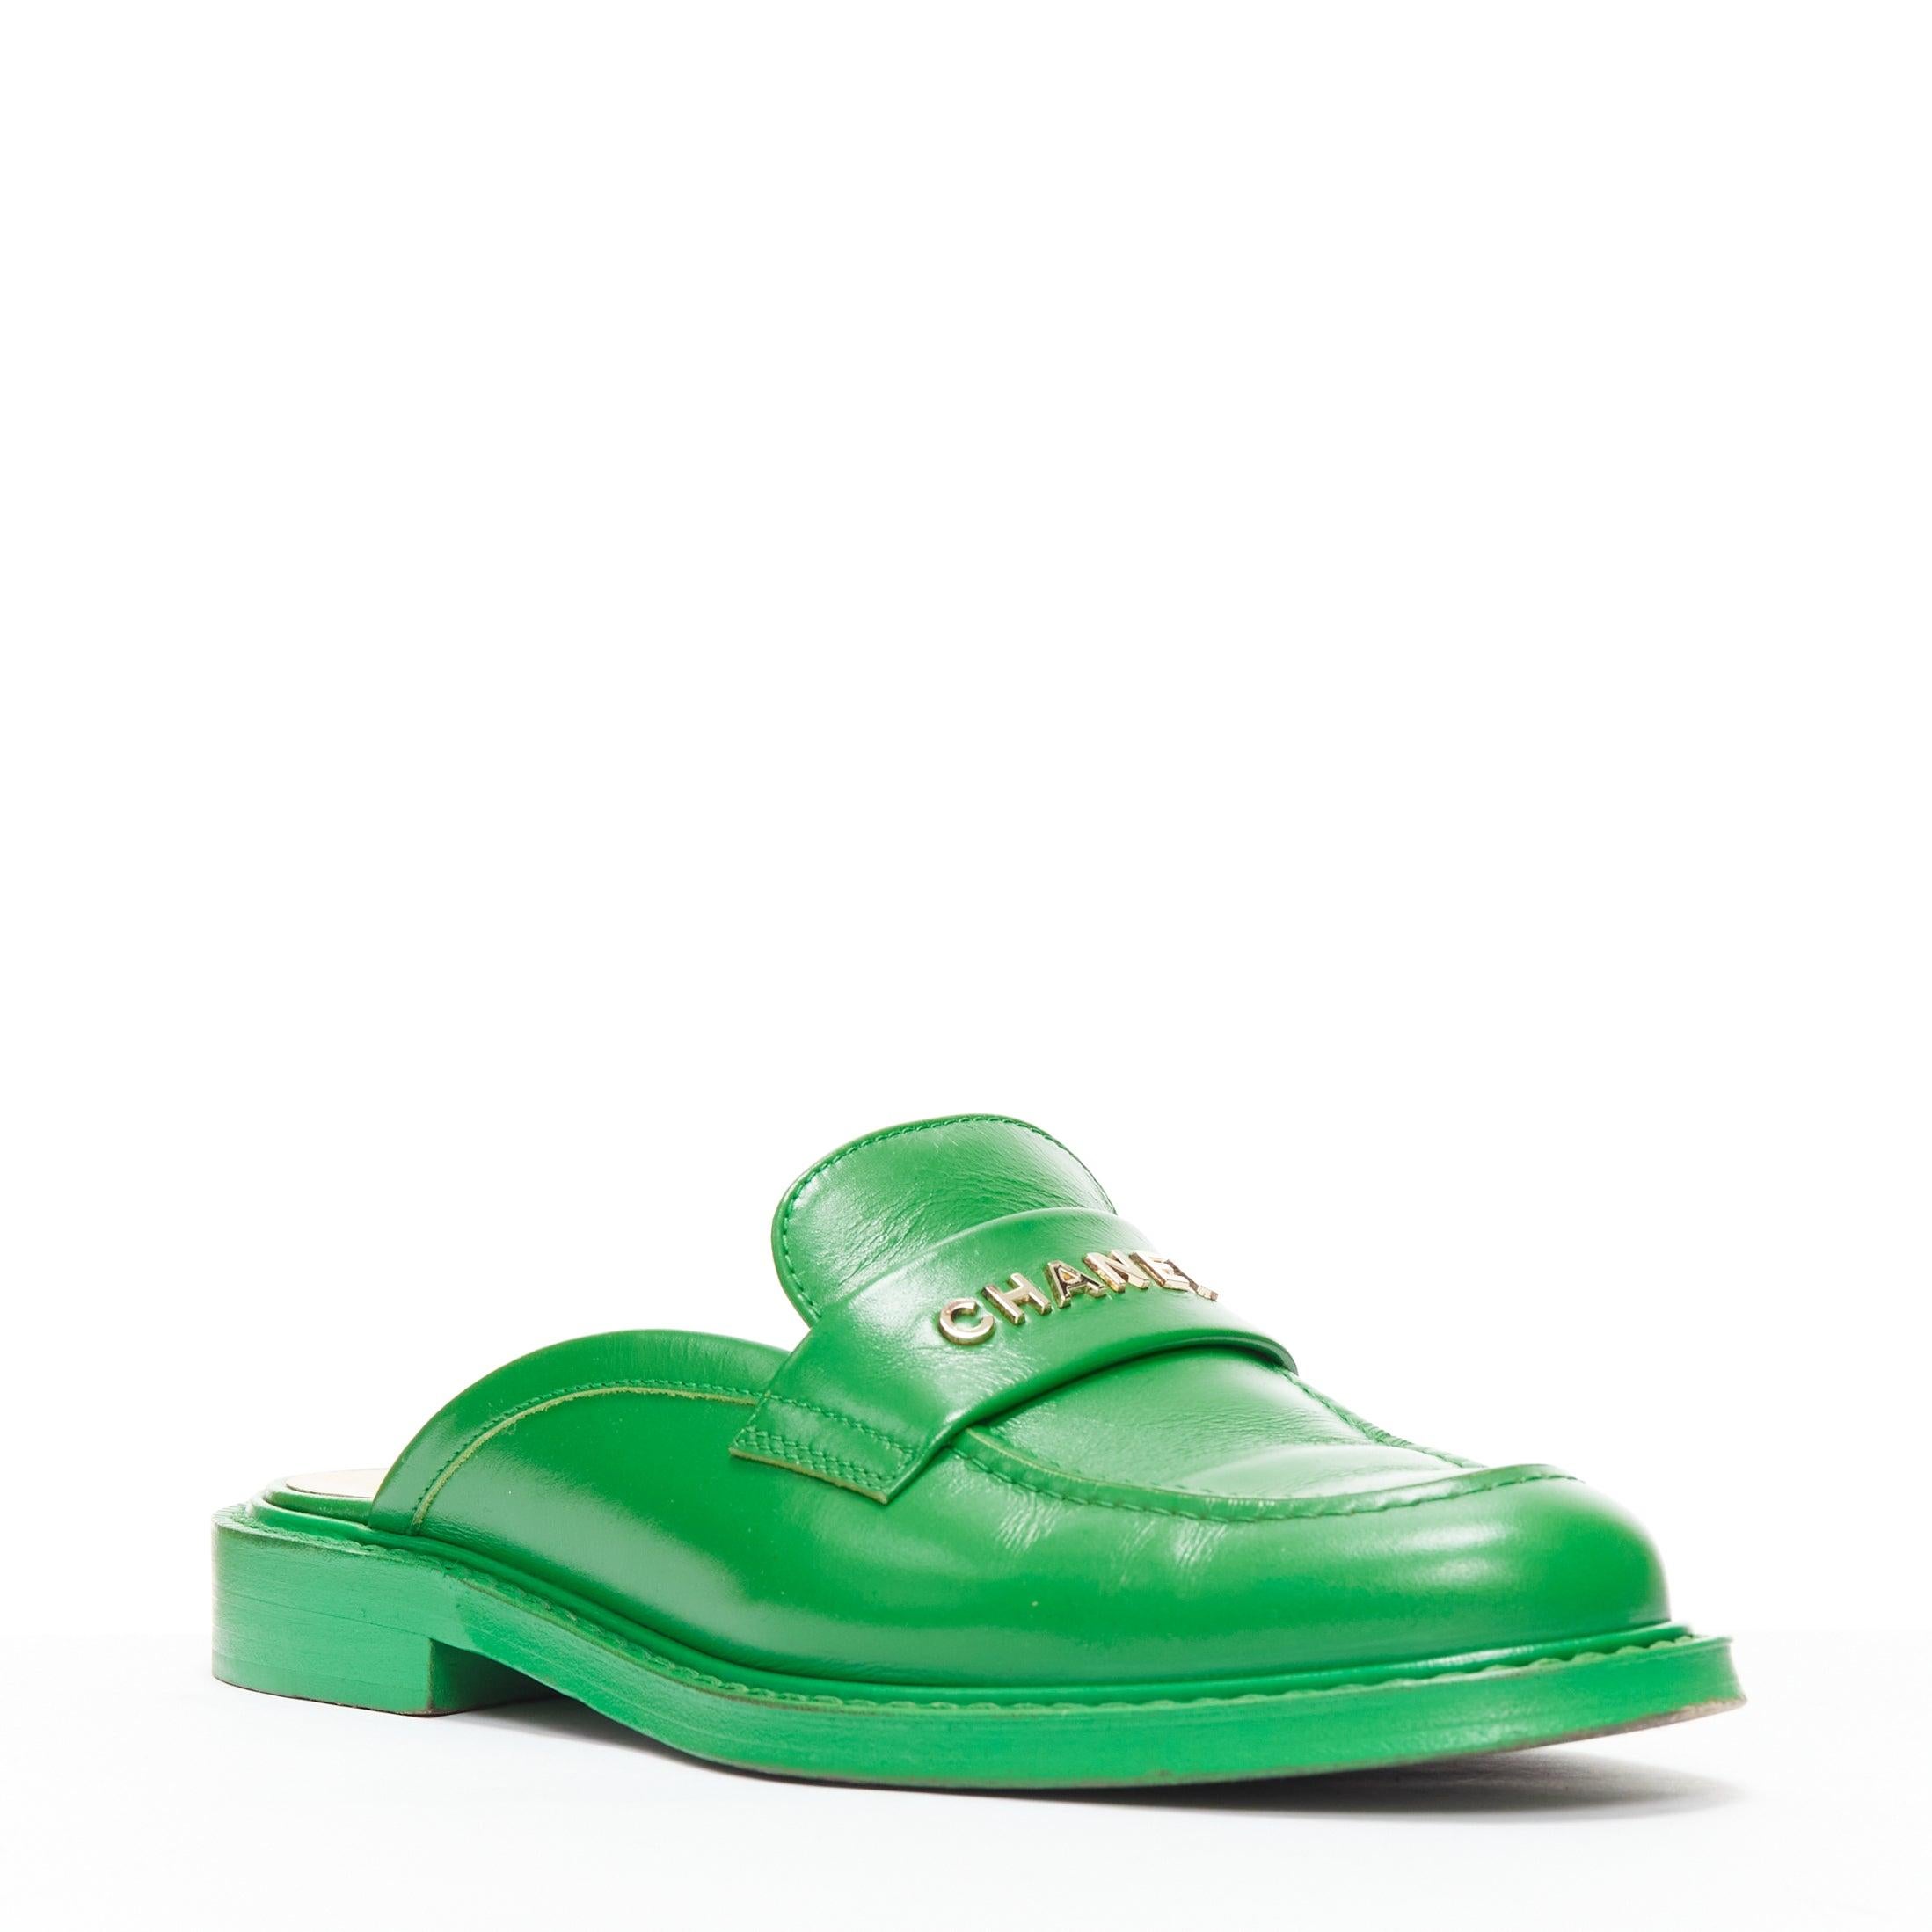 rare CHANEL PHARRELL green leather logo embellished slip on loafer flats EU37.5
Reference: TGAS/D00894
Brand: Chanel
Collection: Pharrell
Material: Leather, Wood
Color: Green, Gold
Pattern: Solid
Lining: Tan Brown Leather
Extra Details: Green